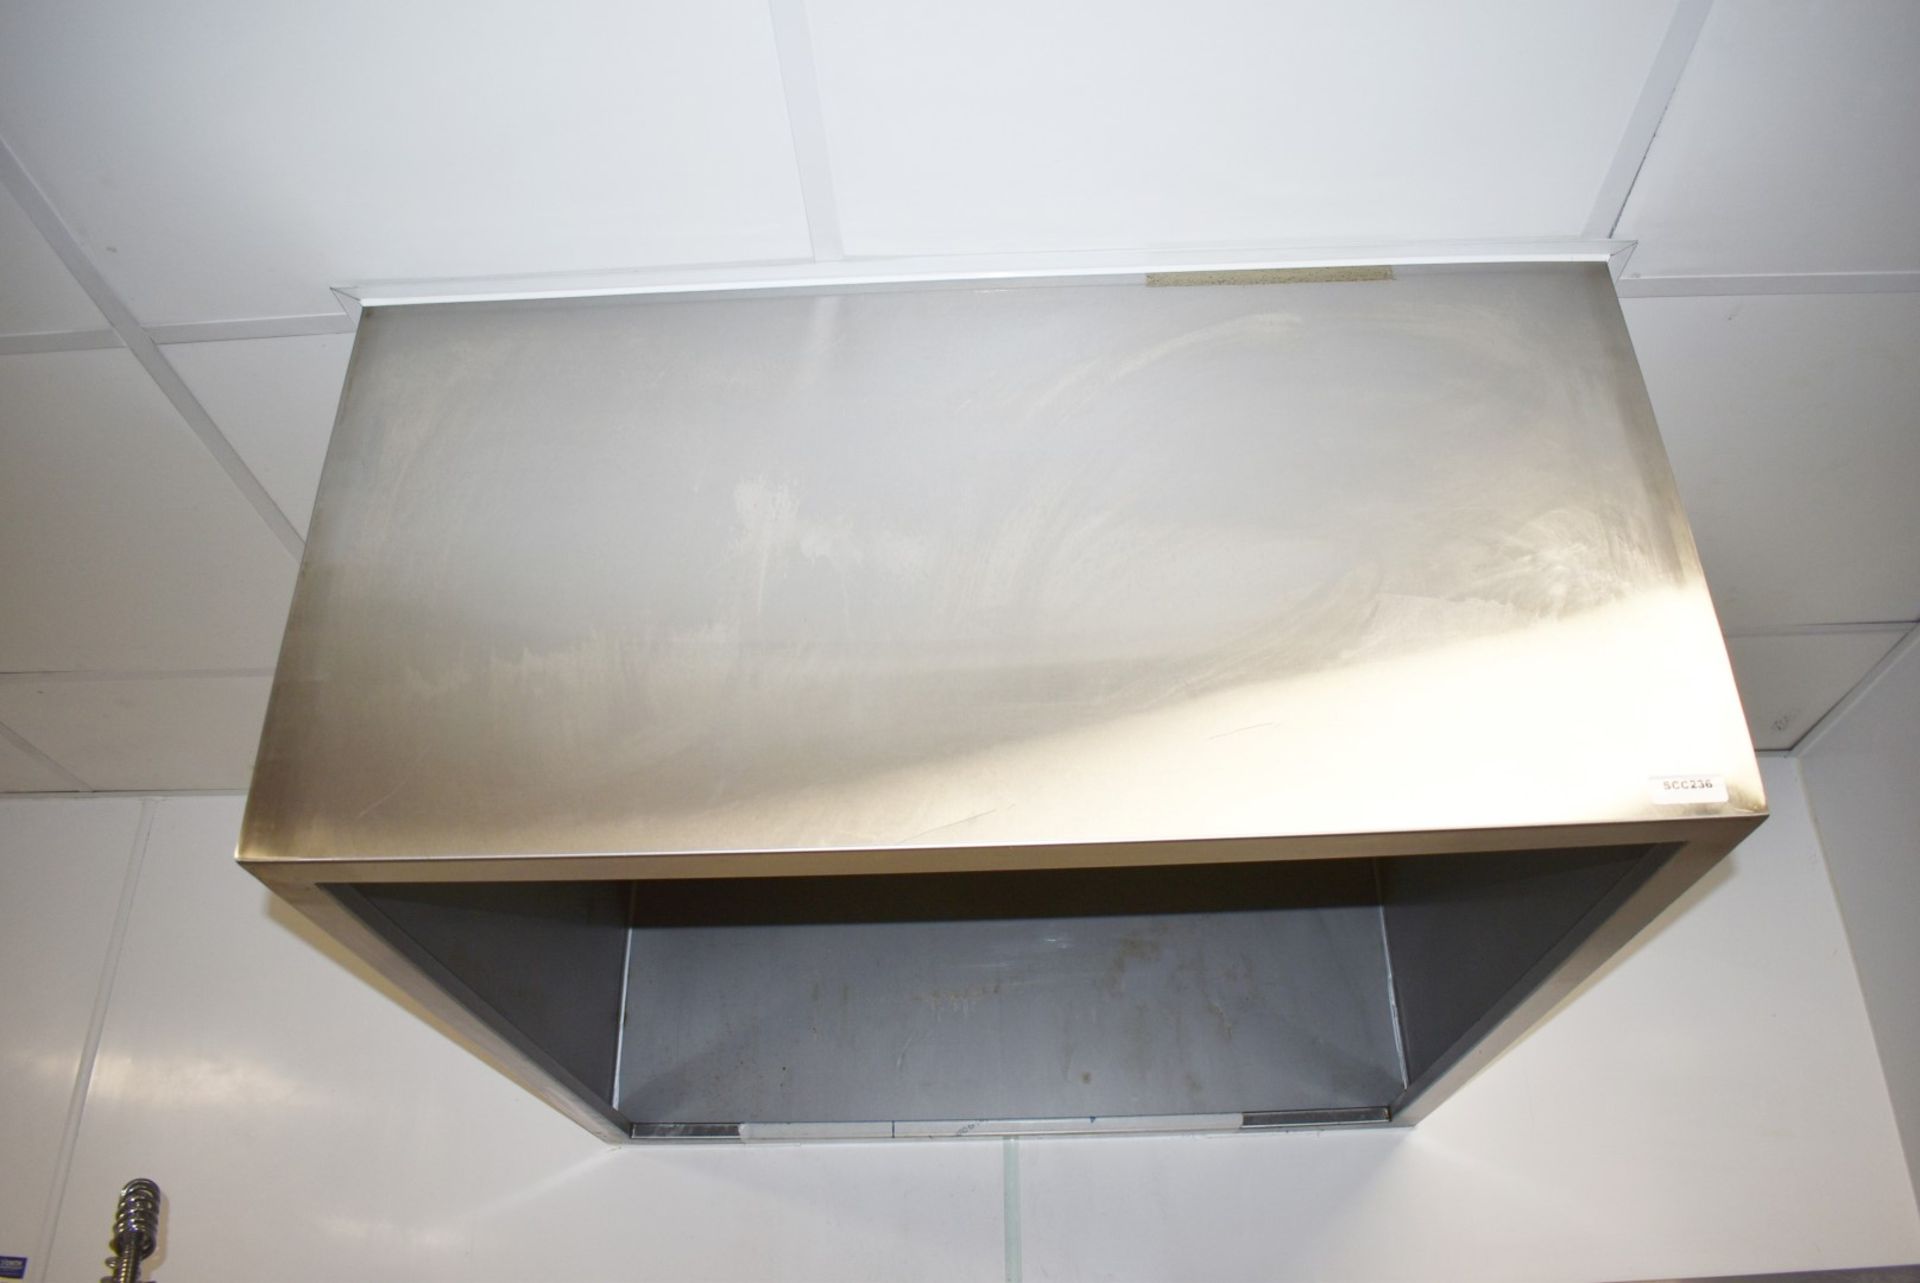 1 x Stainless Steel Extraction Canopy For Passthrough Dishwashers - Size: H48 x W100 x D100 cms - Image 4 of 4